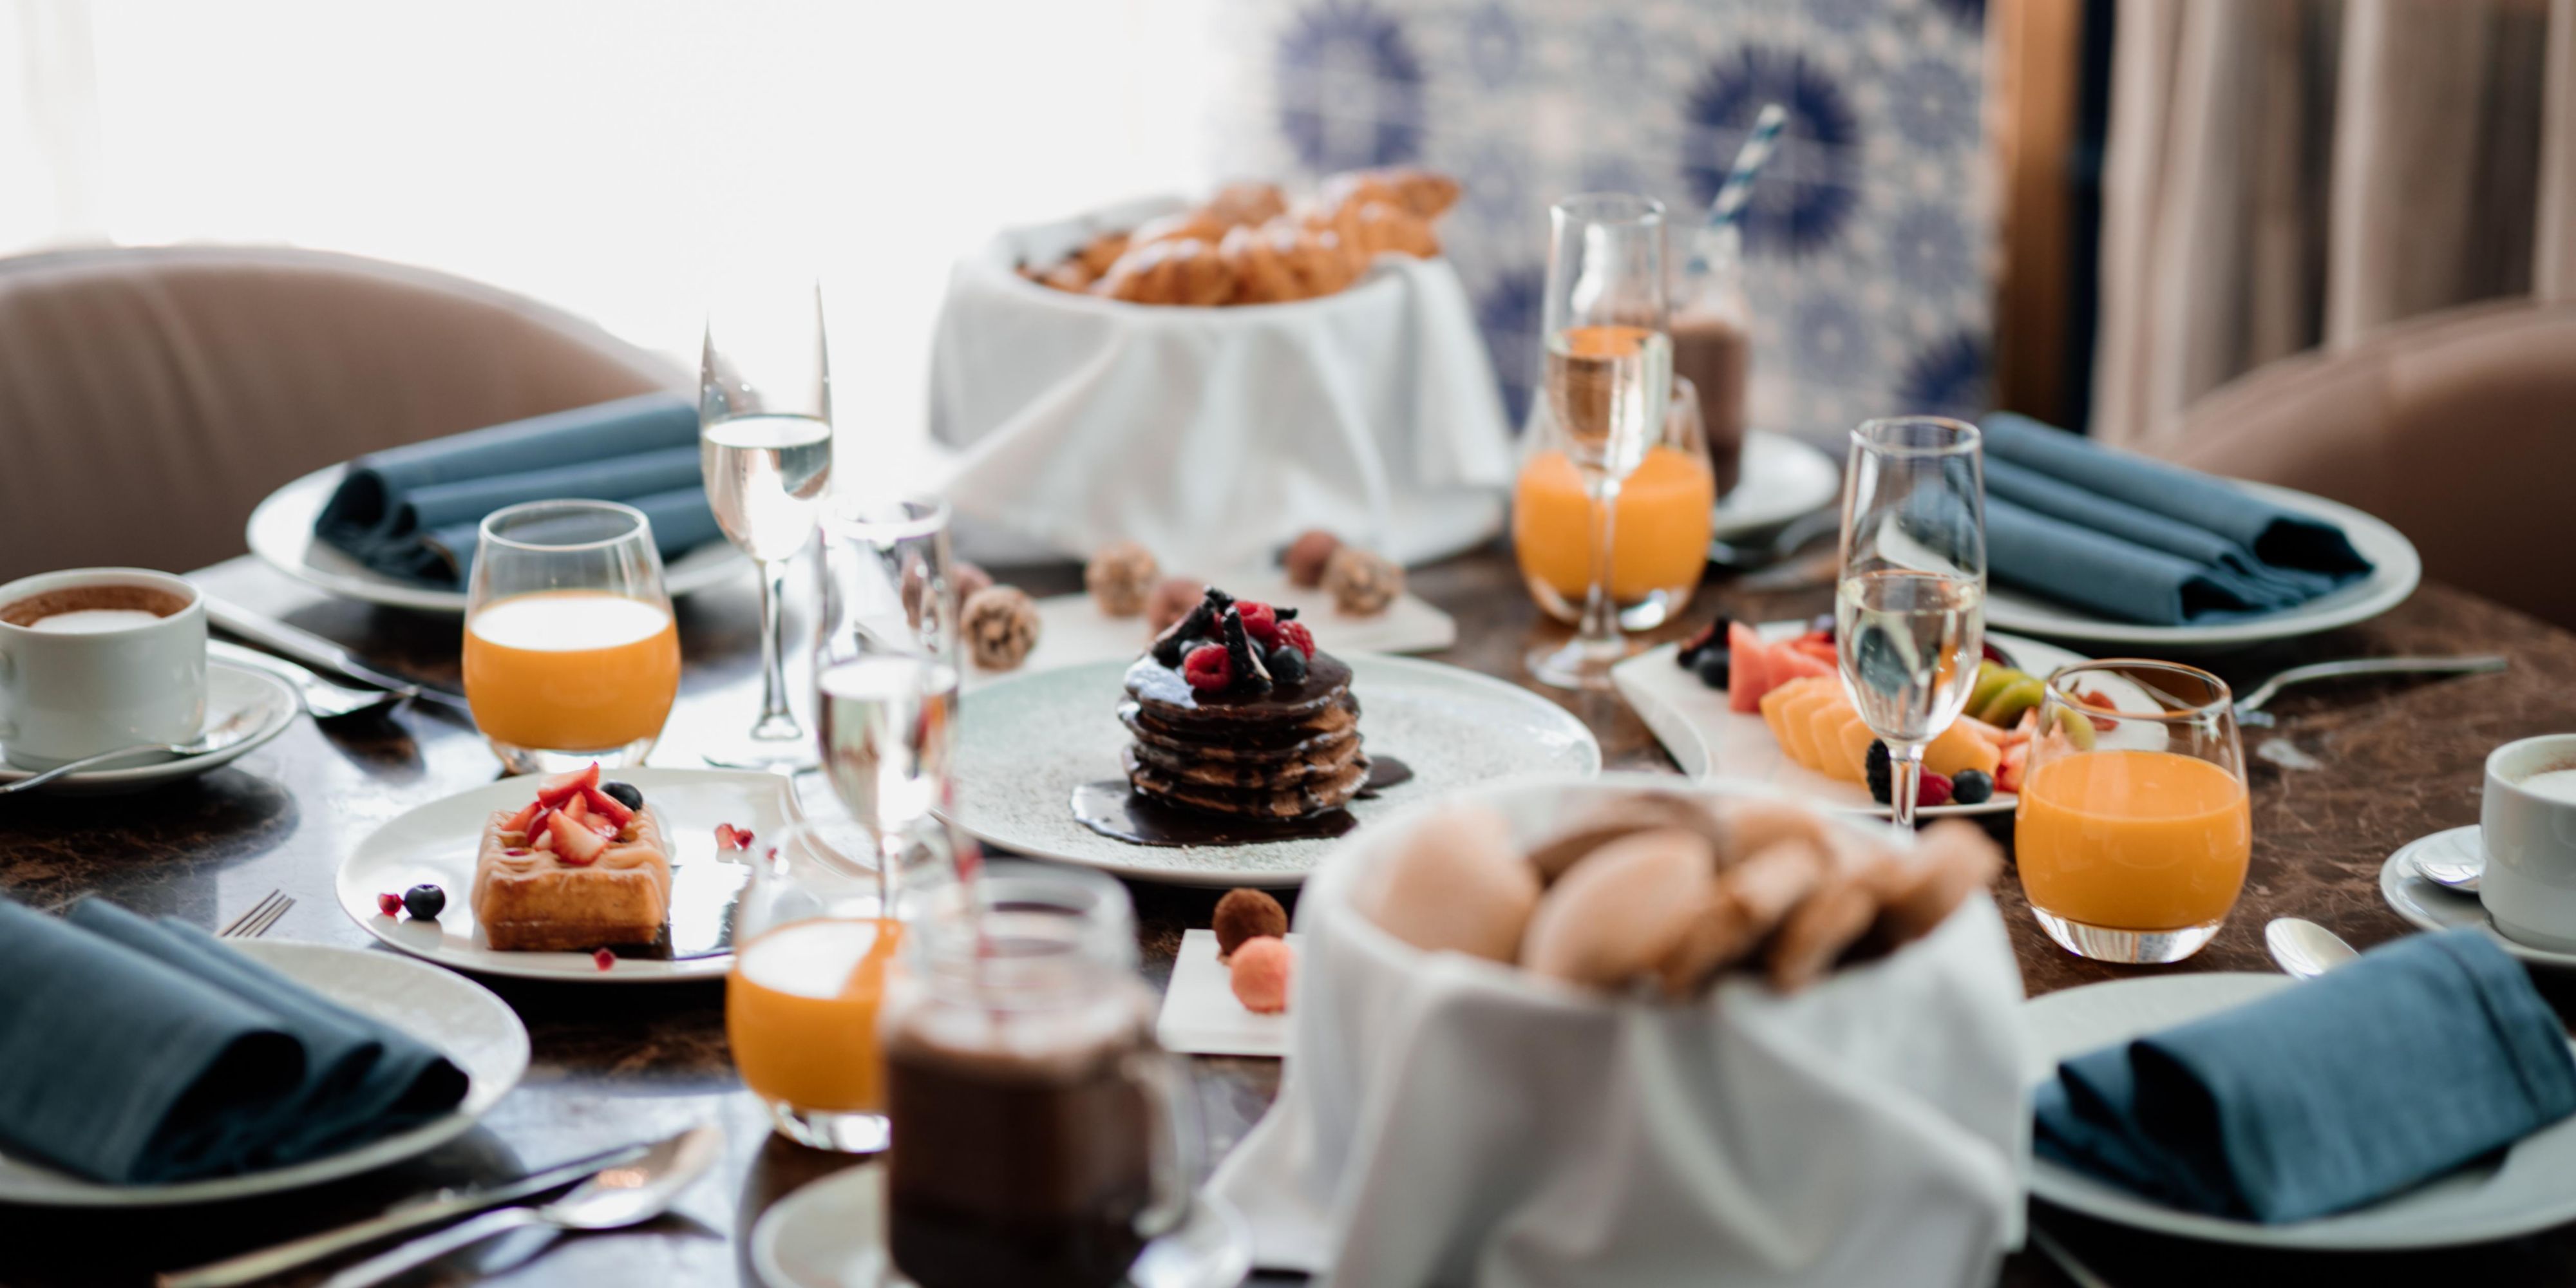 Gather friends and family around a generous Sunday brunch table to enjoy a unique brunch menu, highlighting local ingredients and seasonal flavors.